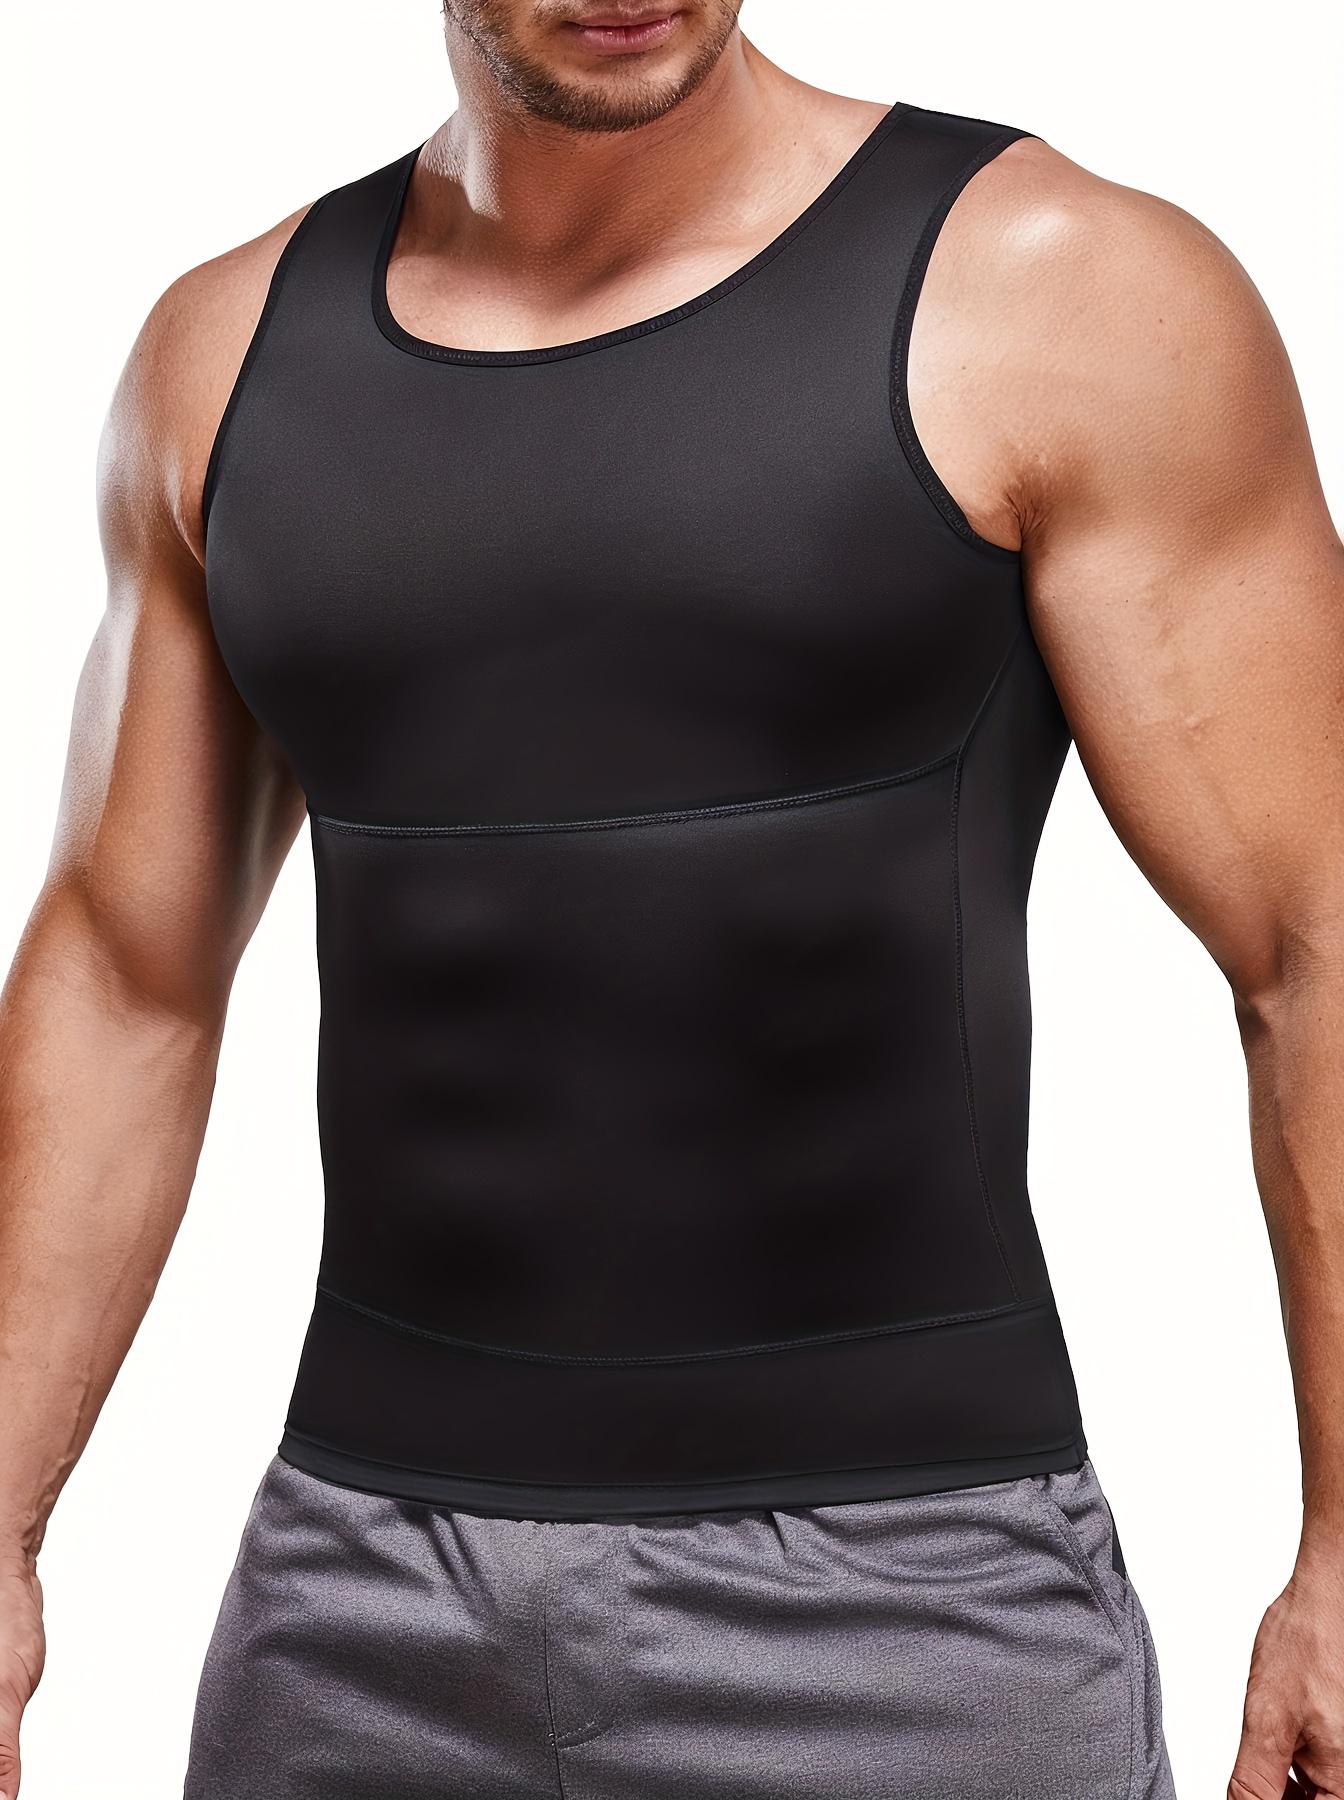 SCARBORO Men's Tummy Control Shapewear Top, Skinny Stretchy Body Shaped  2-Layer Compression Top, Soft Comfortable Daily Basic Men's Shapewear